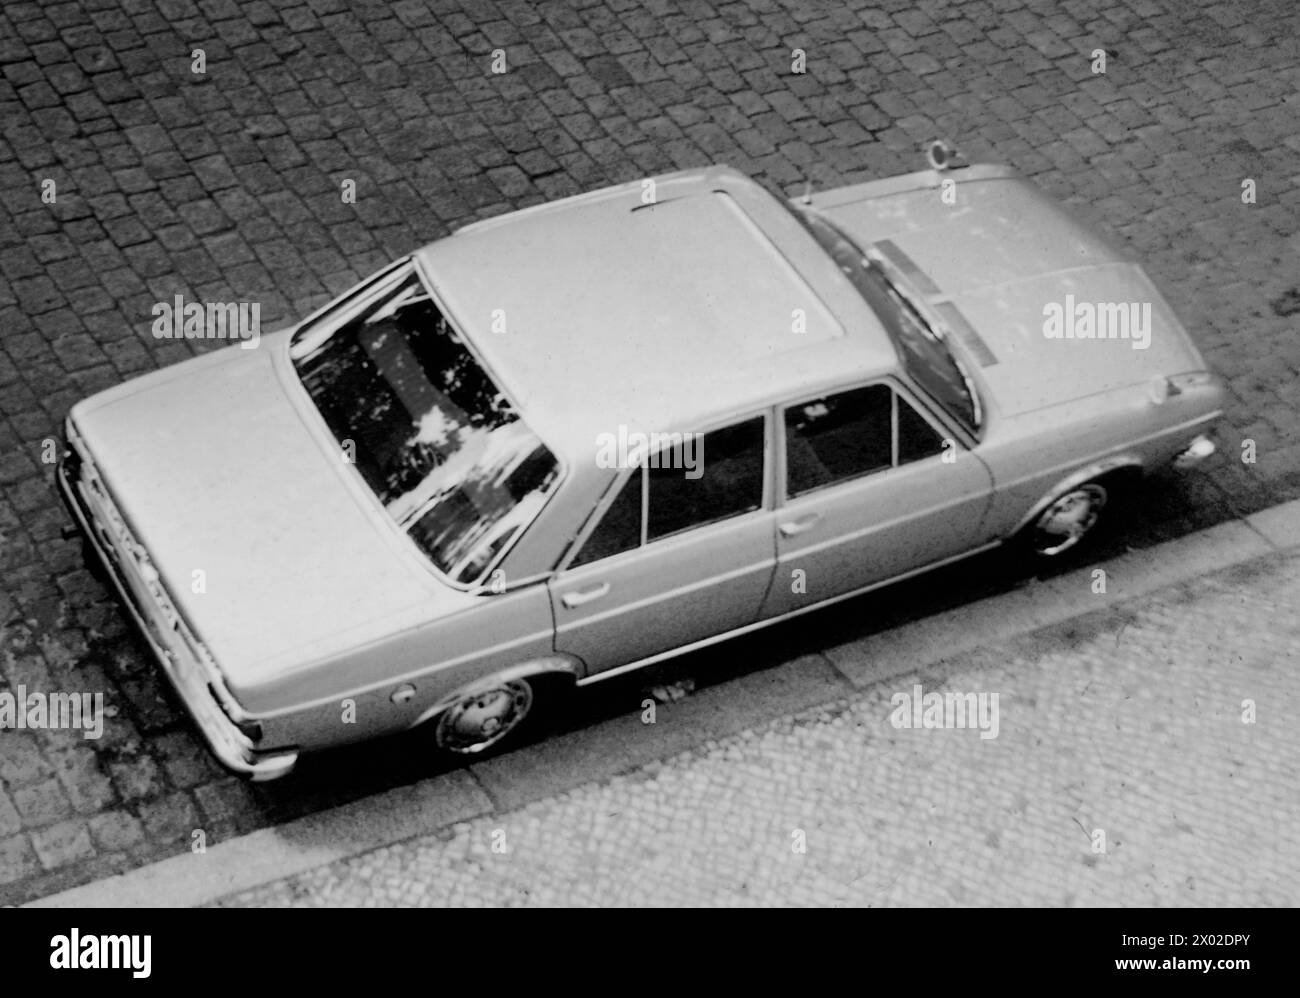 Camping GER, 20230801, Aufnahme ca. 1972, Parkendes Auto *** Camping GER, 20230801, Foto ca. 1972, geparktes Auto Stockfoto